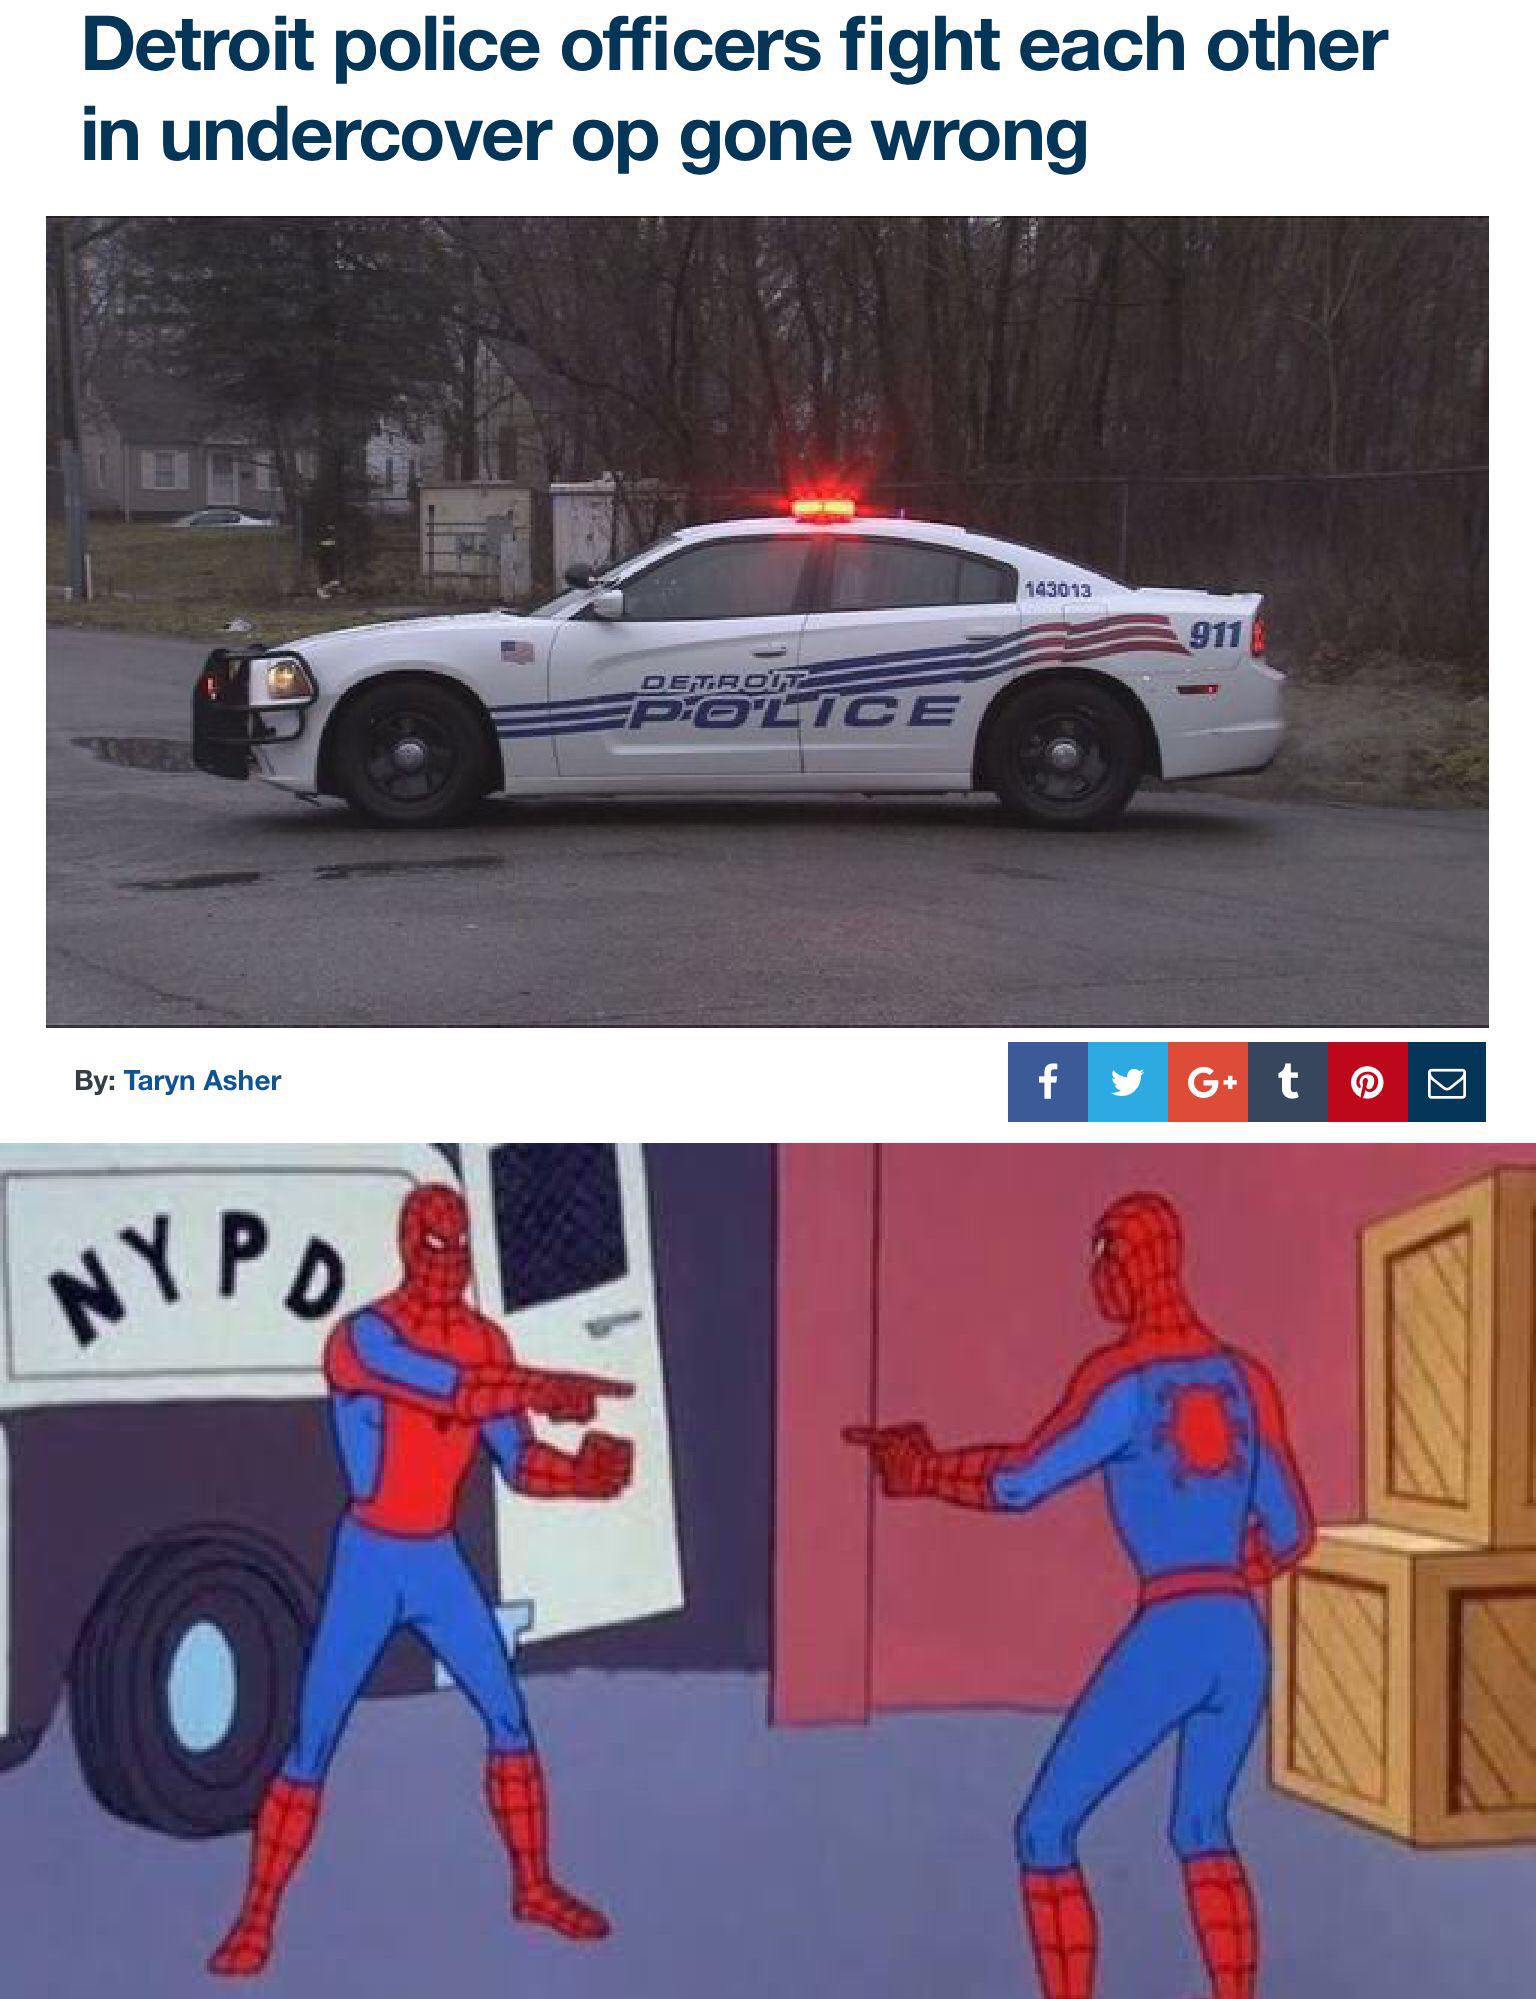 spiderman meme police - Detroit police officers fight each other in undercover op gone wrong 143013 911 DETRO17 Ace By Taryn Asher Nyp